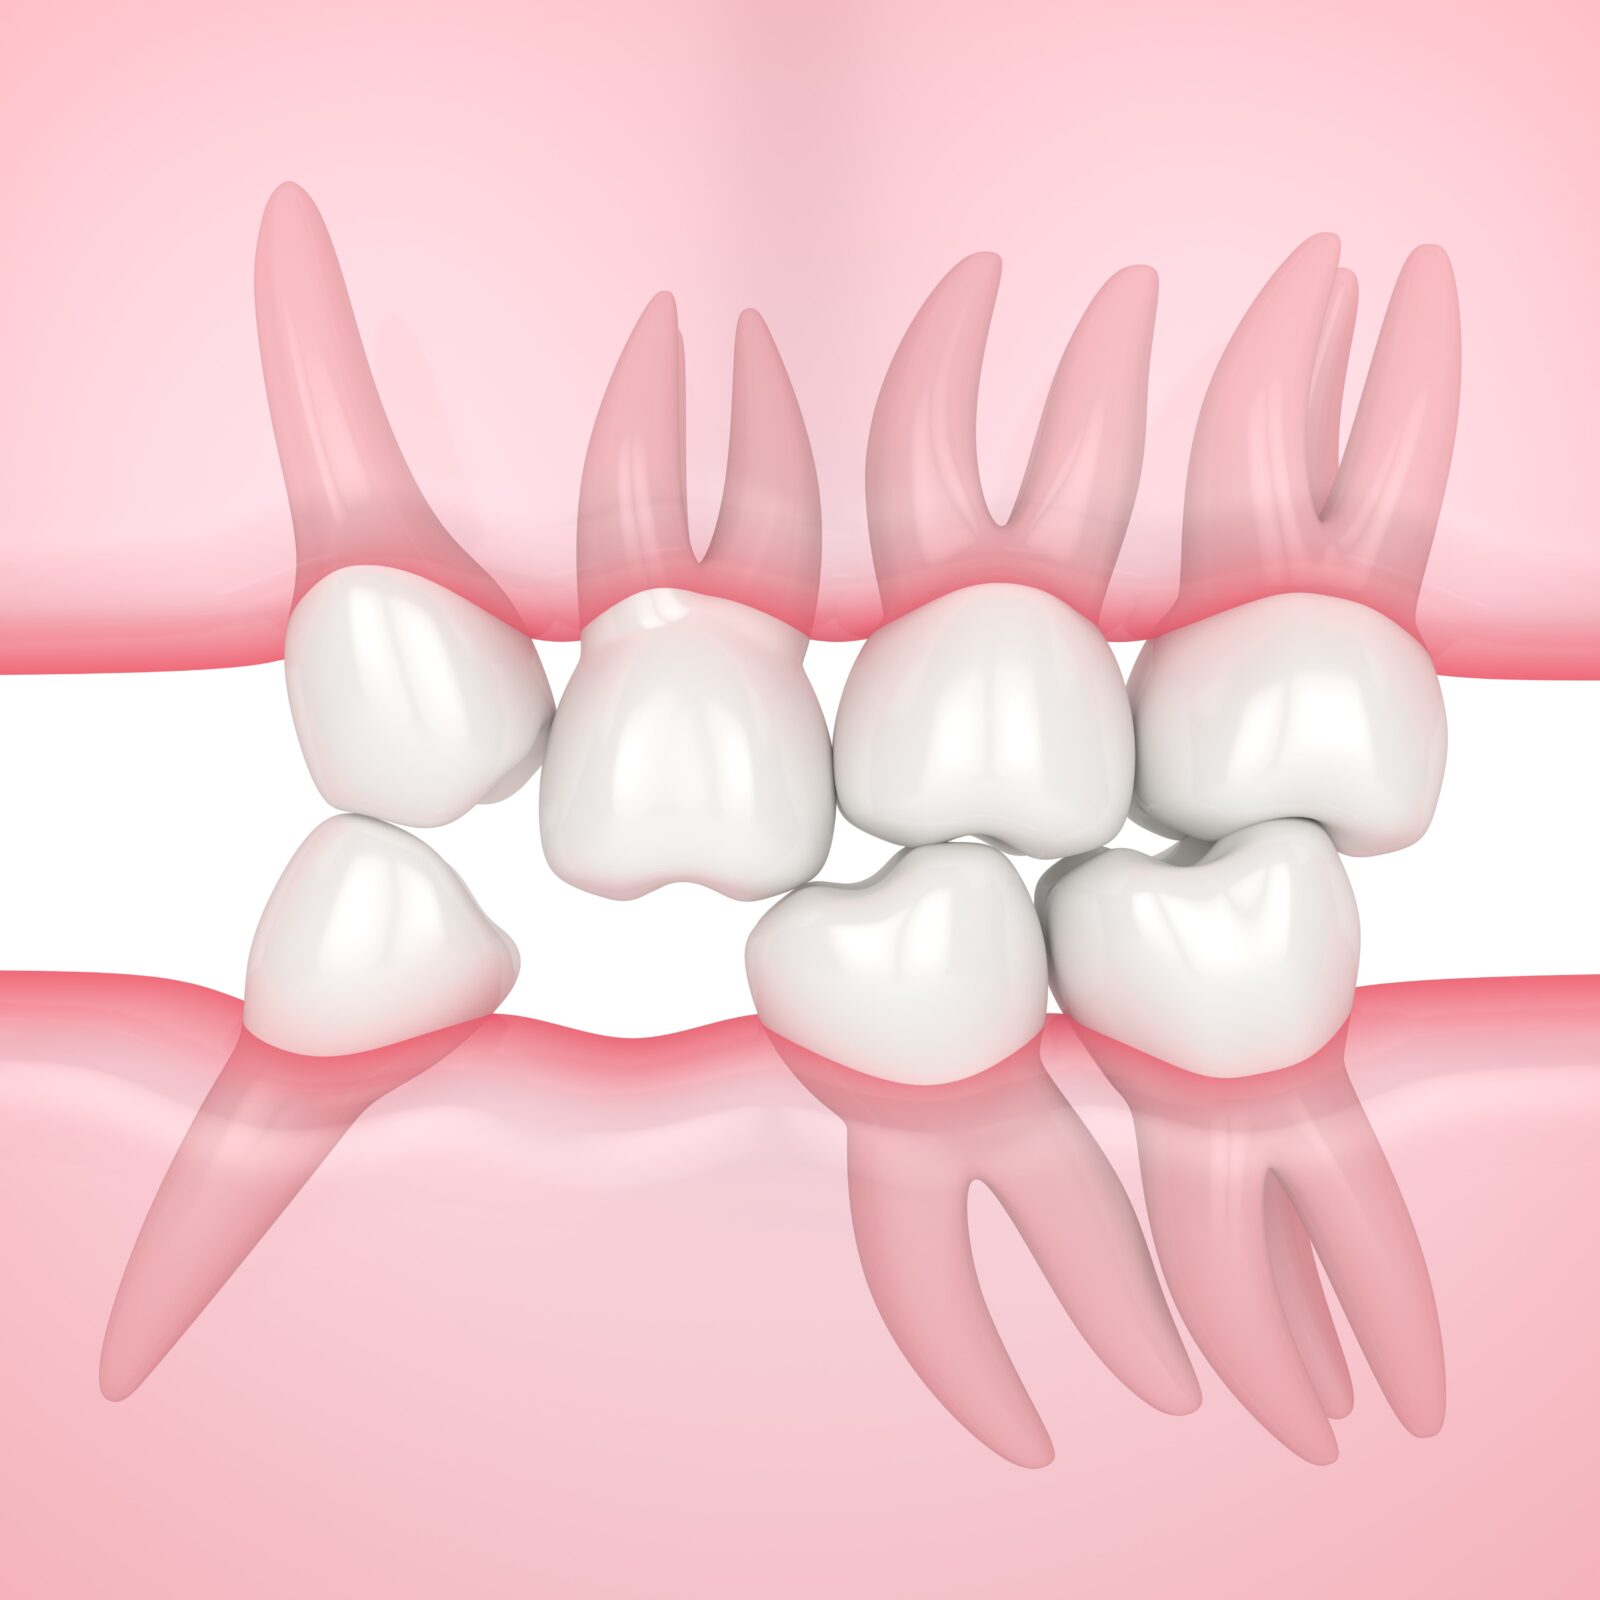 alignment problems due to a missing tooth